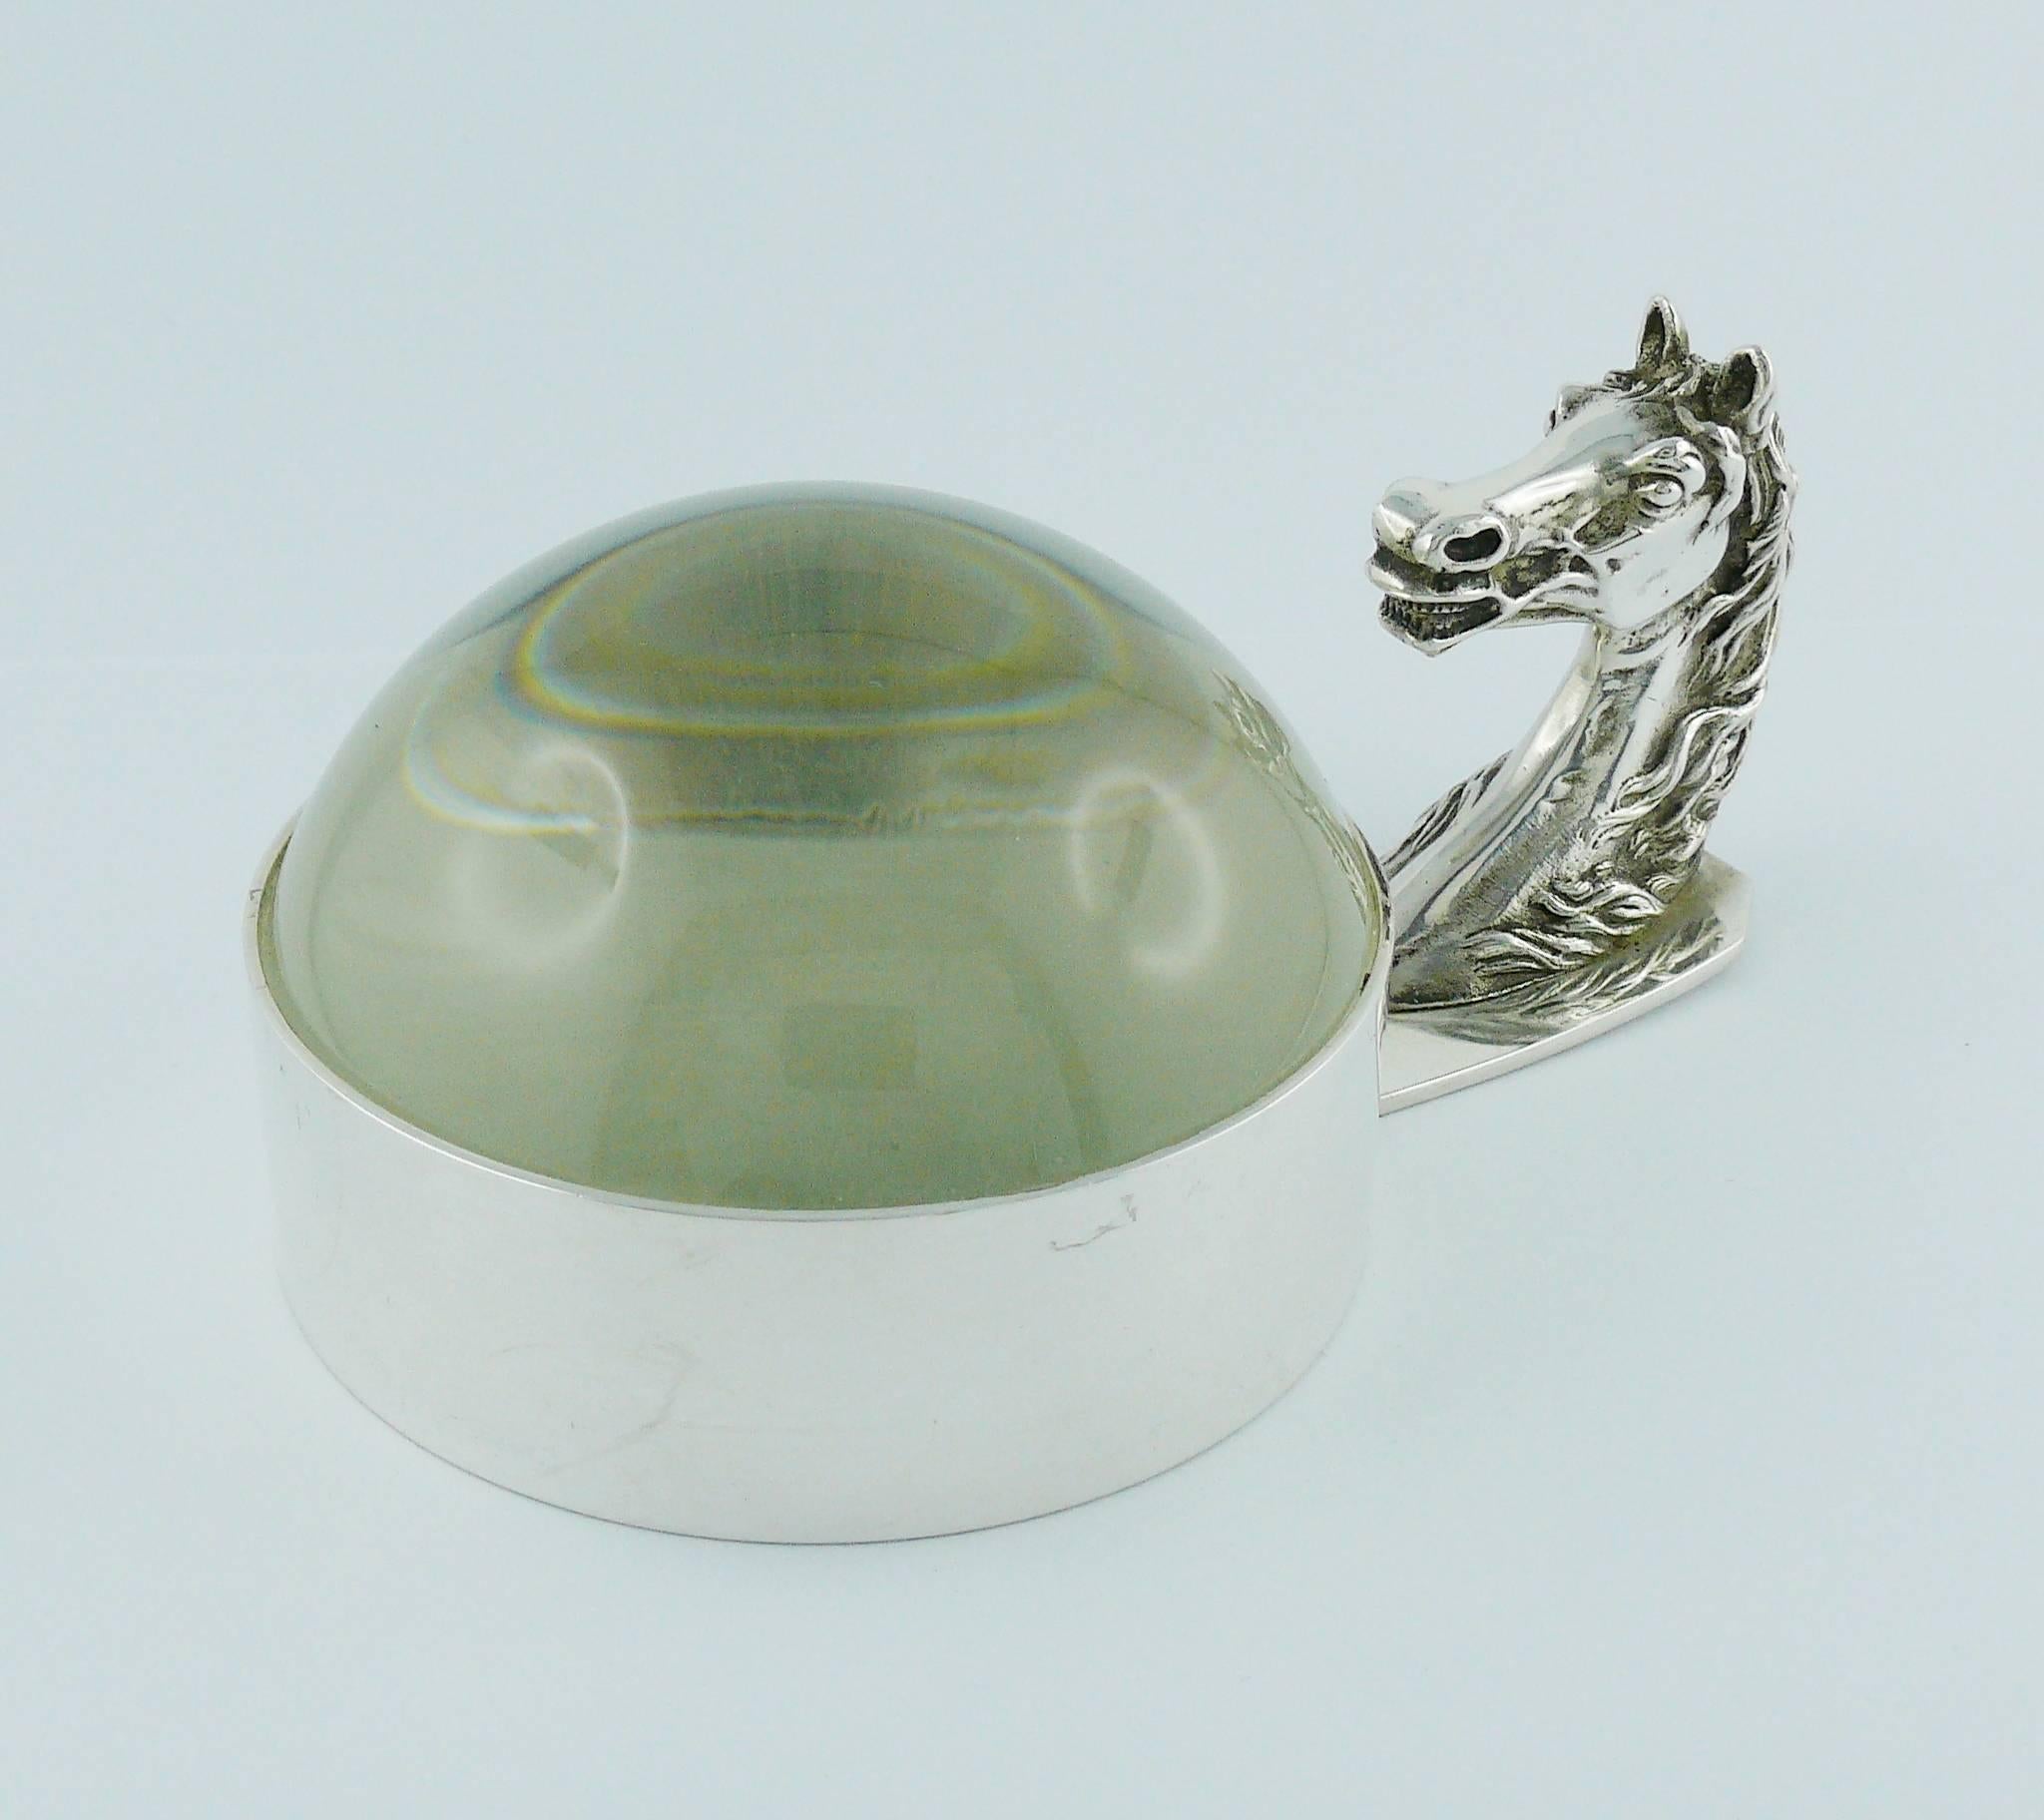 HERMES Paris vintage silver plated equestrian desk paperweight magnifier.

From the iconic HERMES 